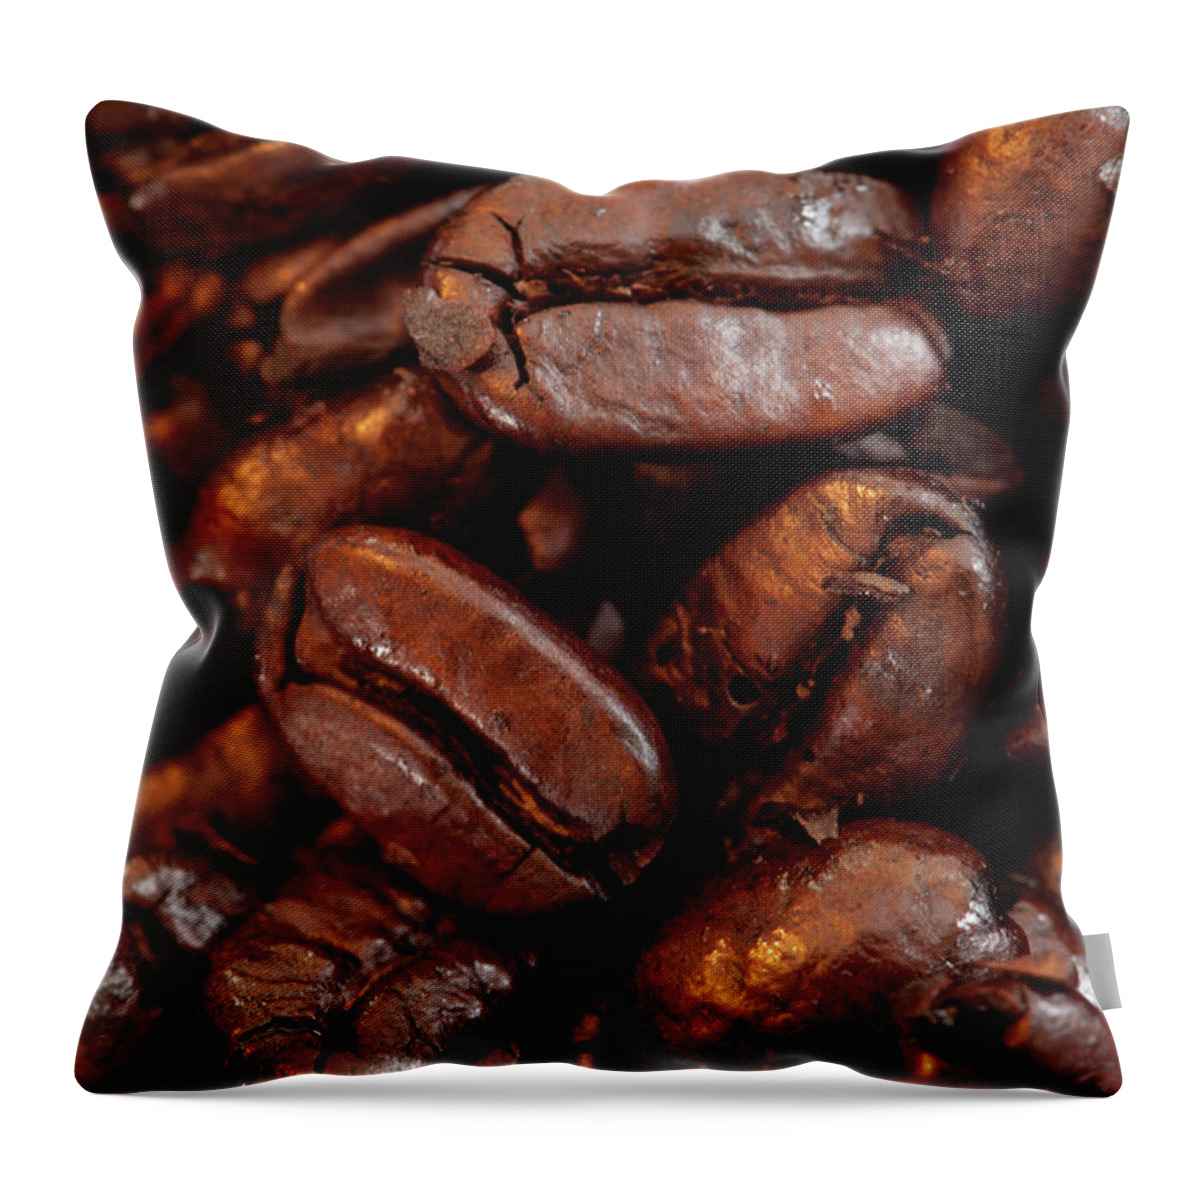 Abstract Throw Pillow featuring the photograph Coffee Beans by Kyle Lee